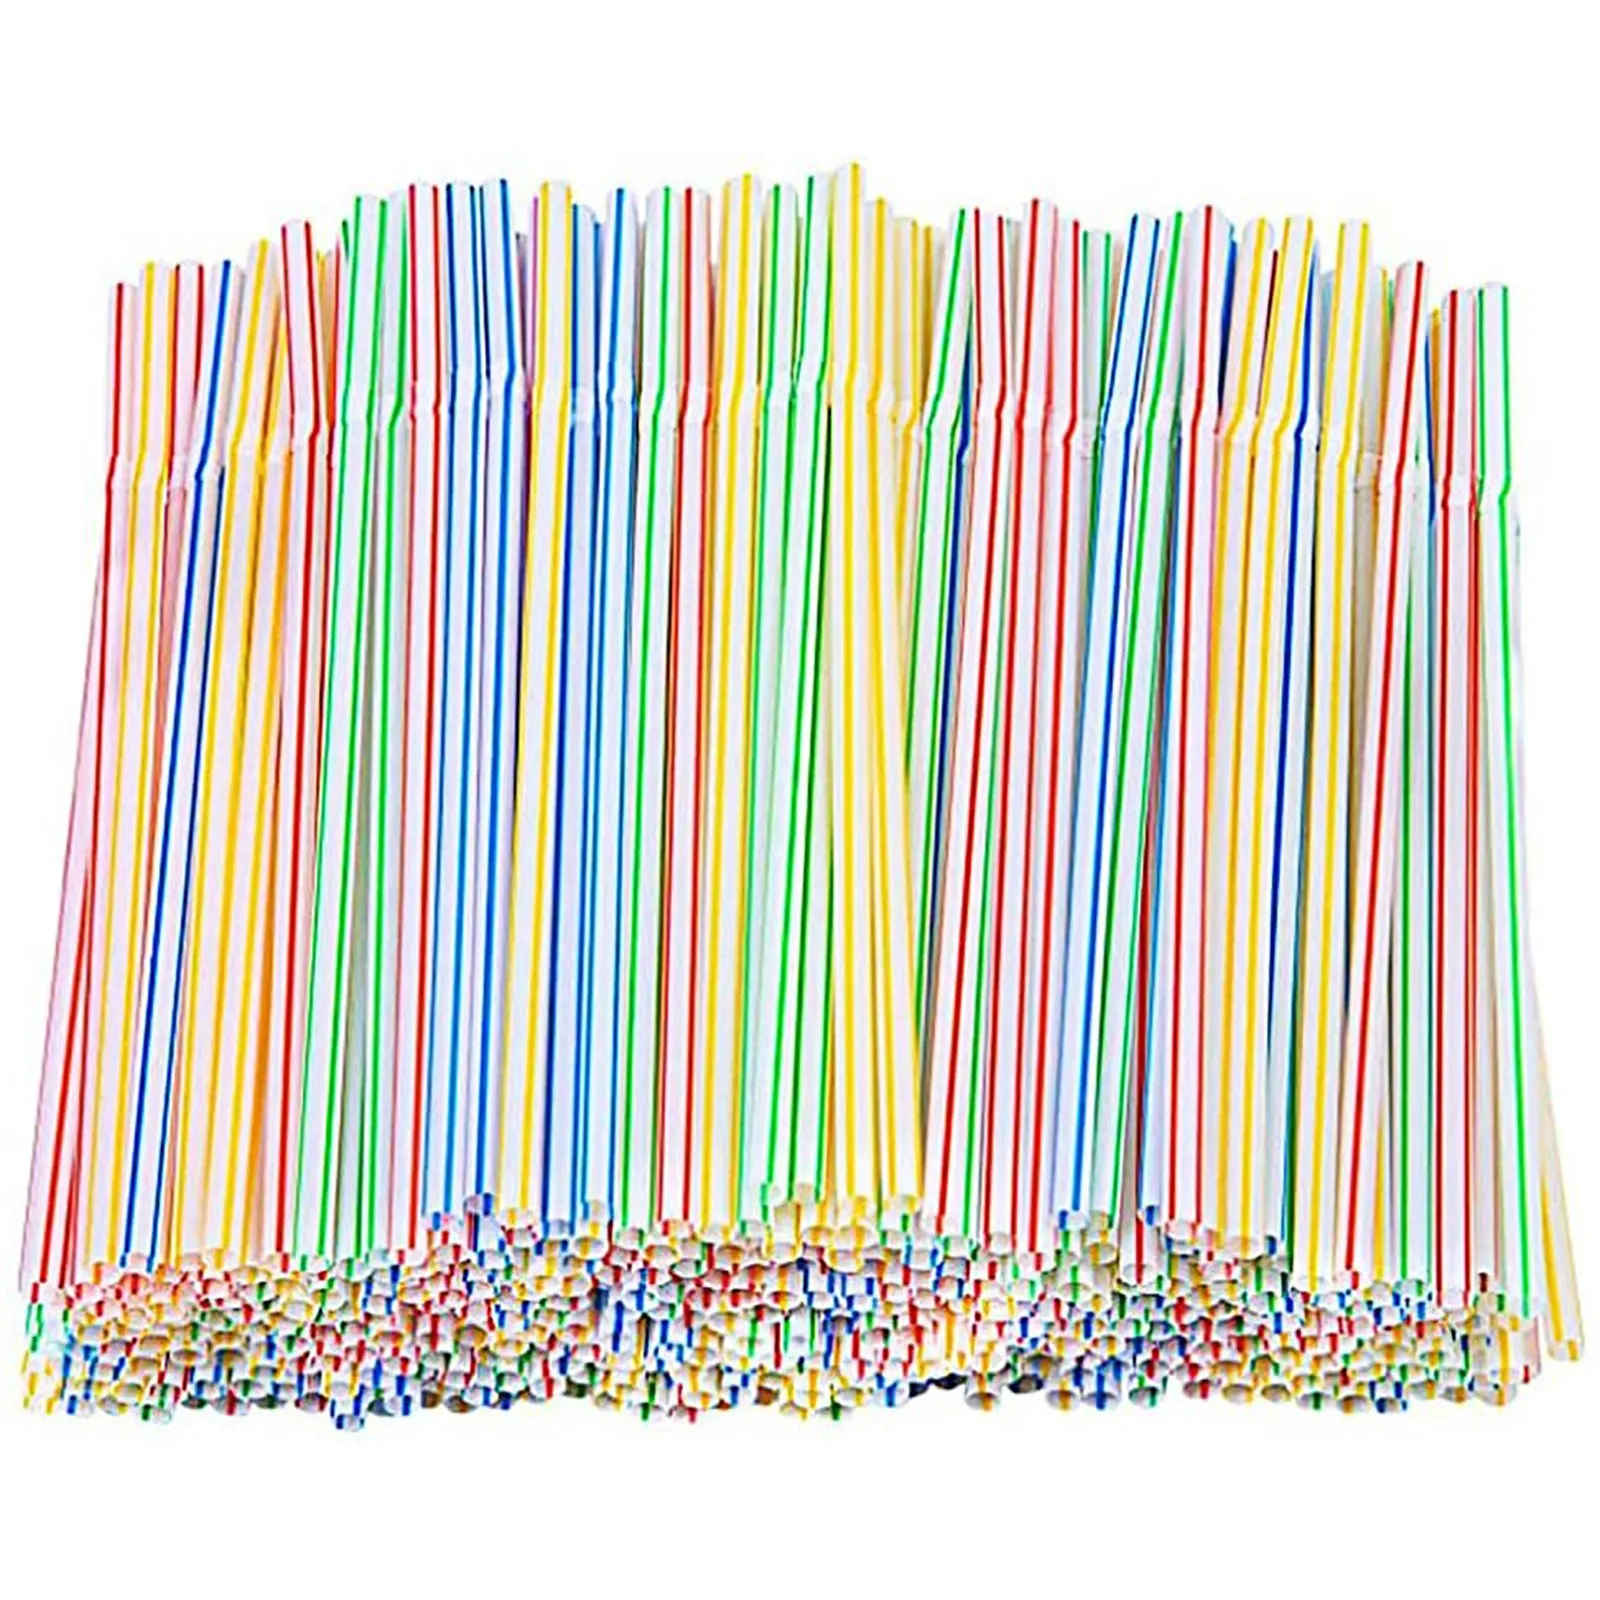 approx 8 inch long 'Spoon Straws' Quality Multi-coloured PARTIES SUPPLIES 